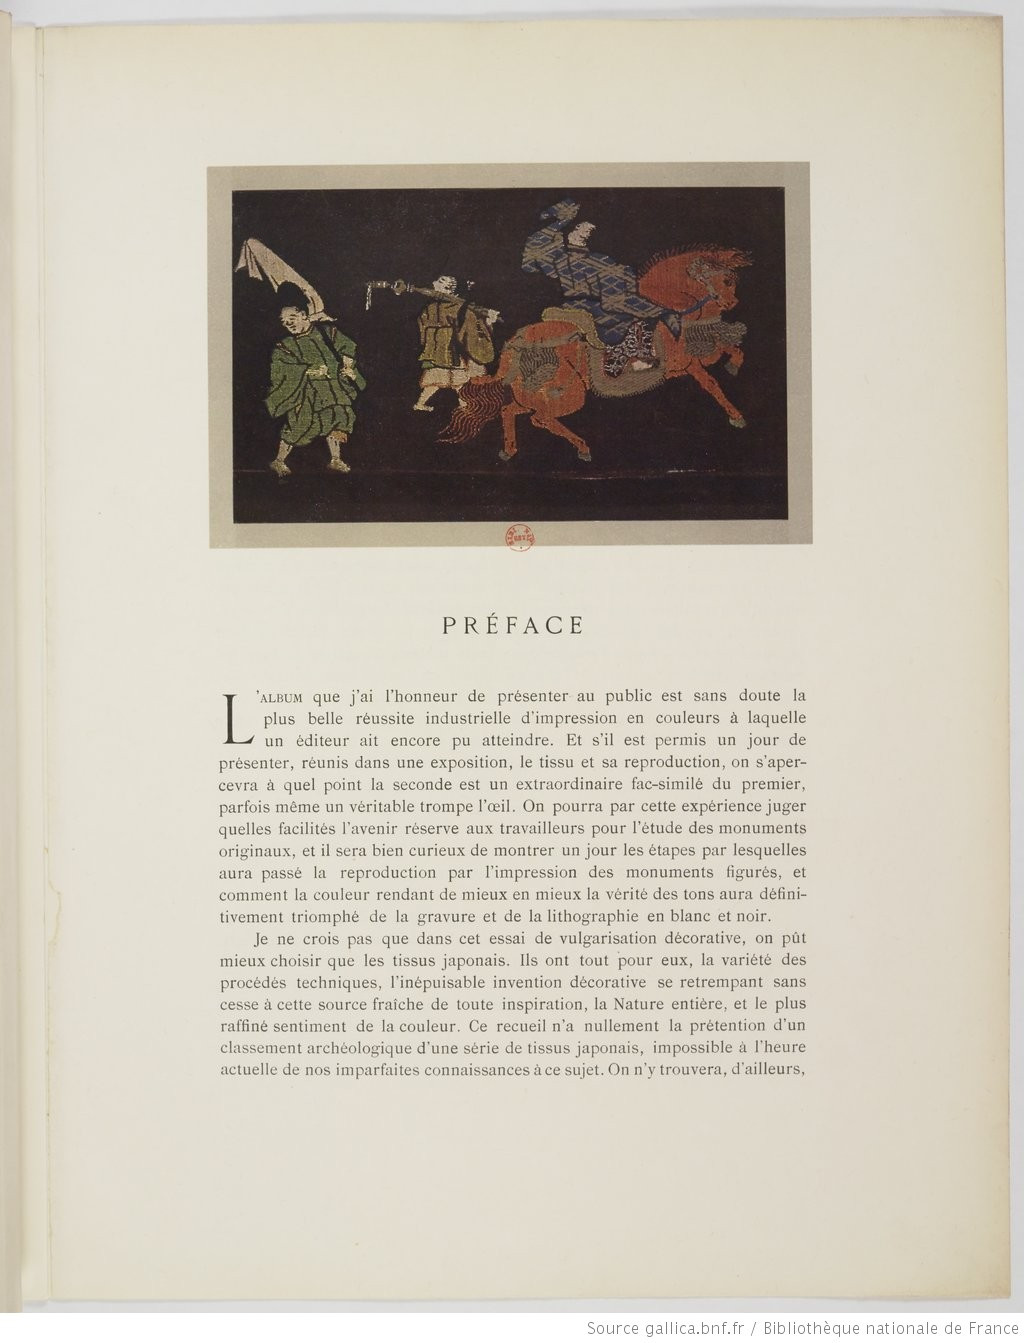 Page of a book illustrated with a battle scene